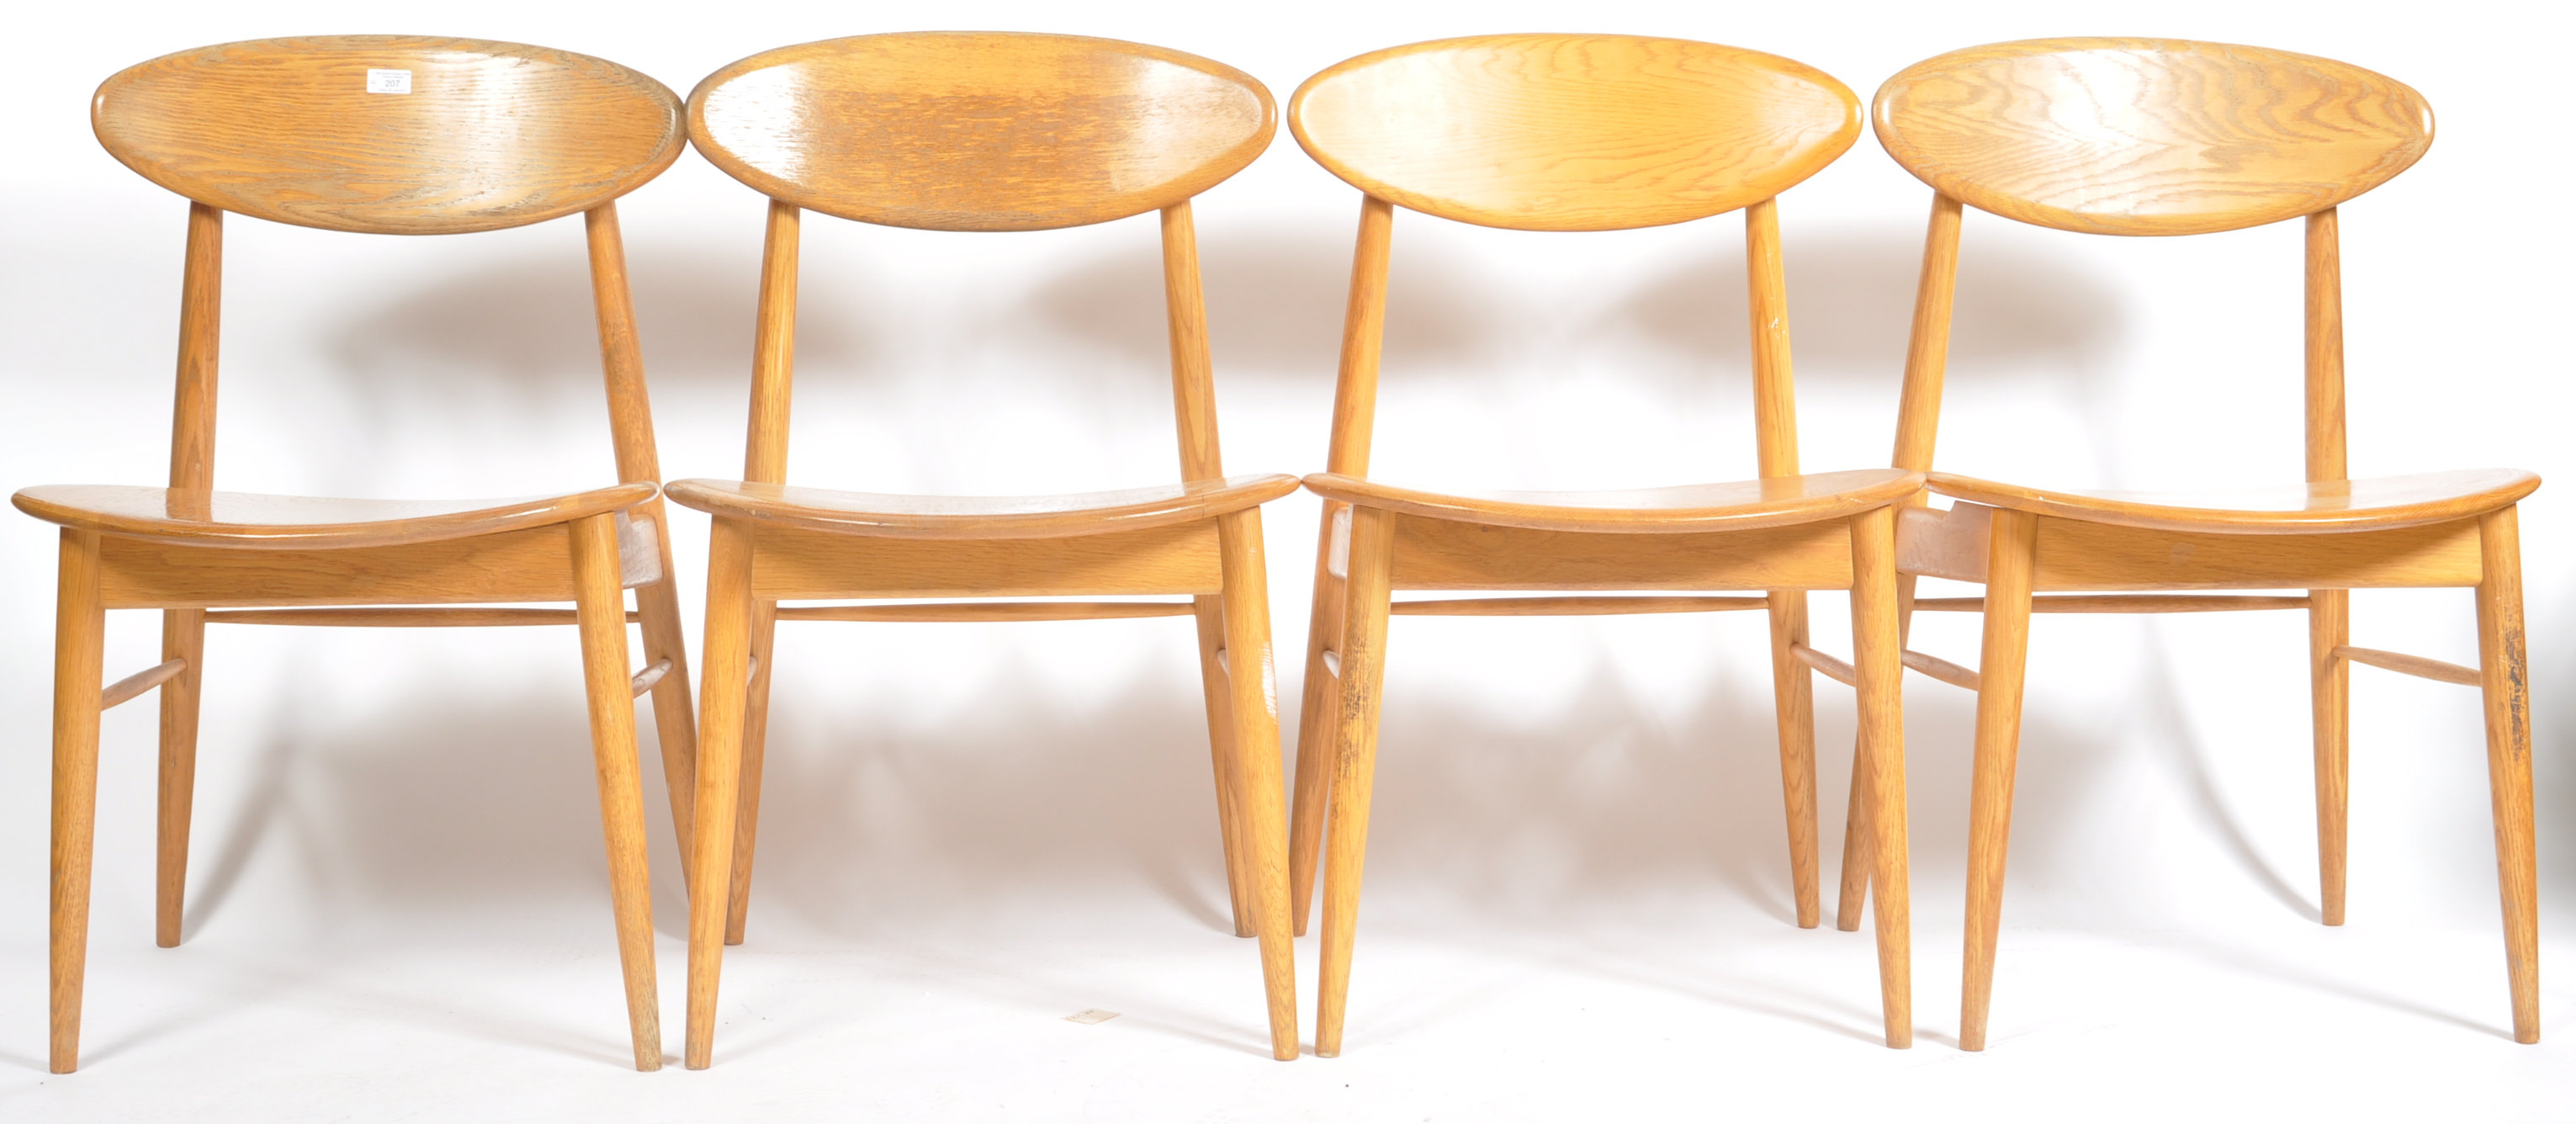 SET OF FOUR RETRO ELM DINING CHAIRS / SIDE CHAIRS